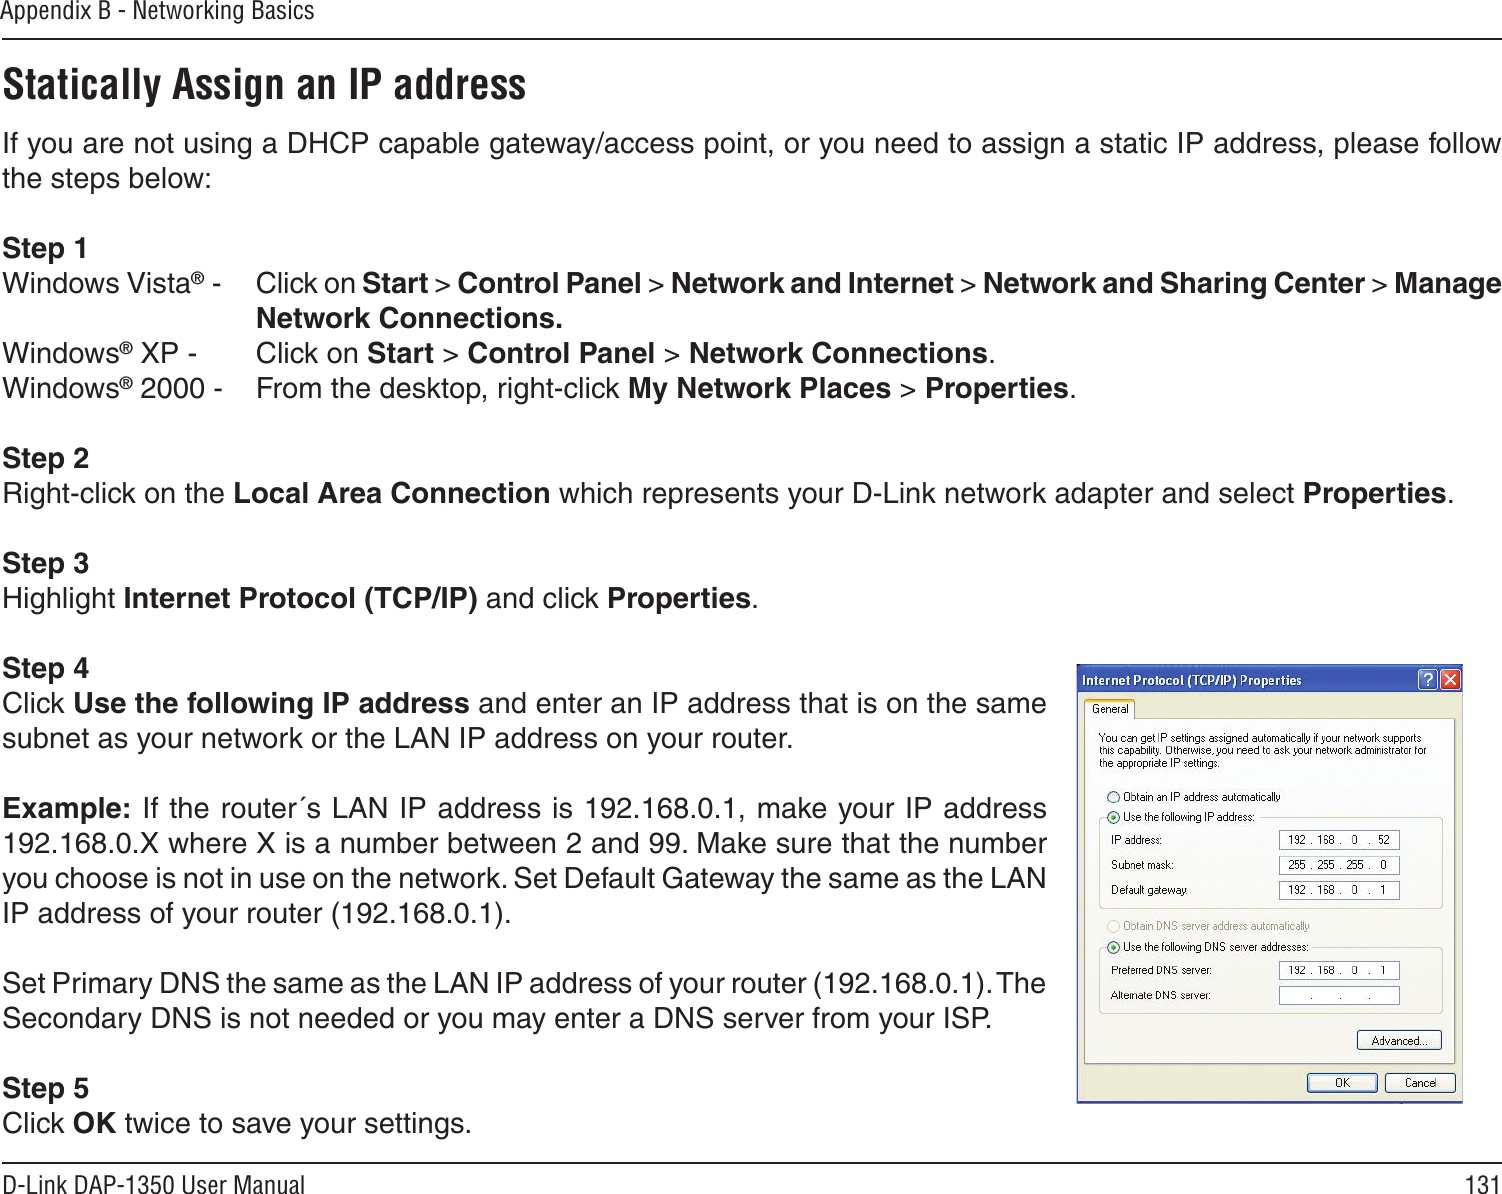 131D-Link DAP-1350 User ManualAppendix B - Networking BasicsStatically Assign an IP addressIf you are not using a DHCP capable gateway/access point, or you need to assign a static IP address, please follow the steps below:Step 1Windows Vista® -  Click on Start &gt; Control Panel &gt; Network and Internet &gt; Network and Sharing Center &gt; Manage Network Connections.Windows® XP -  Click on Start &gt; Control Panel &gt; Network Connections.Windows® 2000 -  From the desktop, right-click My Network Places &gt; Properties.Step 2Right-click on the Local Area Connection which represents your D-Link network adapter and select Properties.Step 3Highlight Internet Protocol (TCP/IP) and click Properties.Step 4Click Use the following IP address and enter an IP address that is on the same subnet as your network or the LAN IP address on your router. Example: If the router´s LAN IP address is 192.168.0.1, make your IP address 192.168.0.X where X is a number between 2 and 99. Make sure that the number you choose is not in use on the network. Set Default Gateway the same as the LAN IP address of your router (192.168.0.1). Set Primary DNS the same as the LAN IP address of your router (192.168.0.1). The Secondary DNS is not needed or you may enter a DNS server from your ISP.Step 5Click OK twice to save your settings.